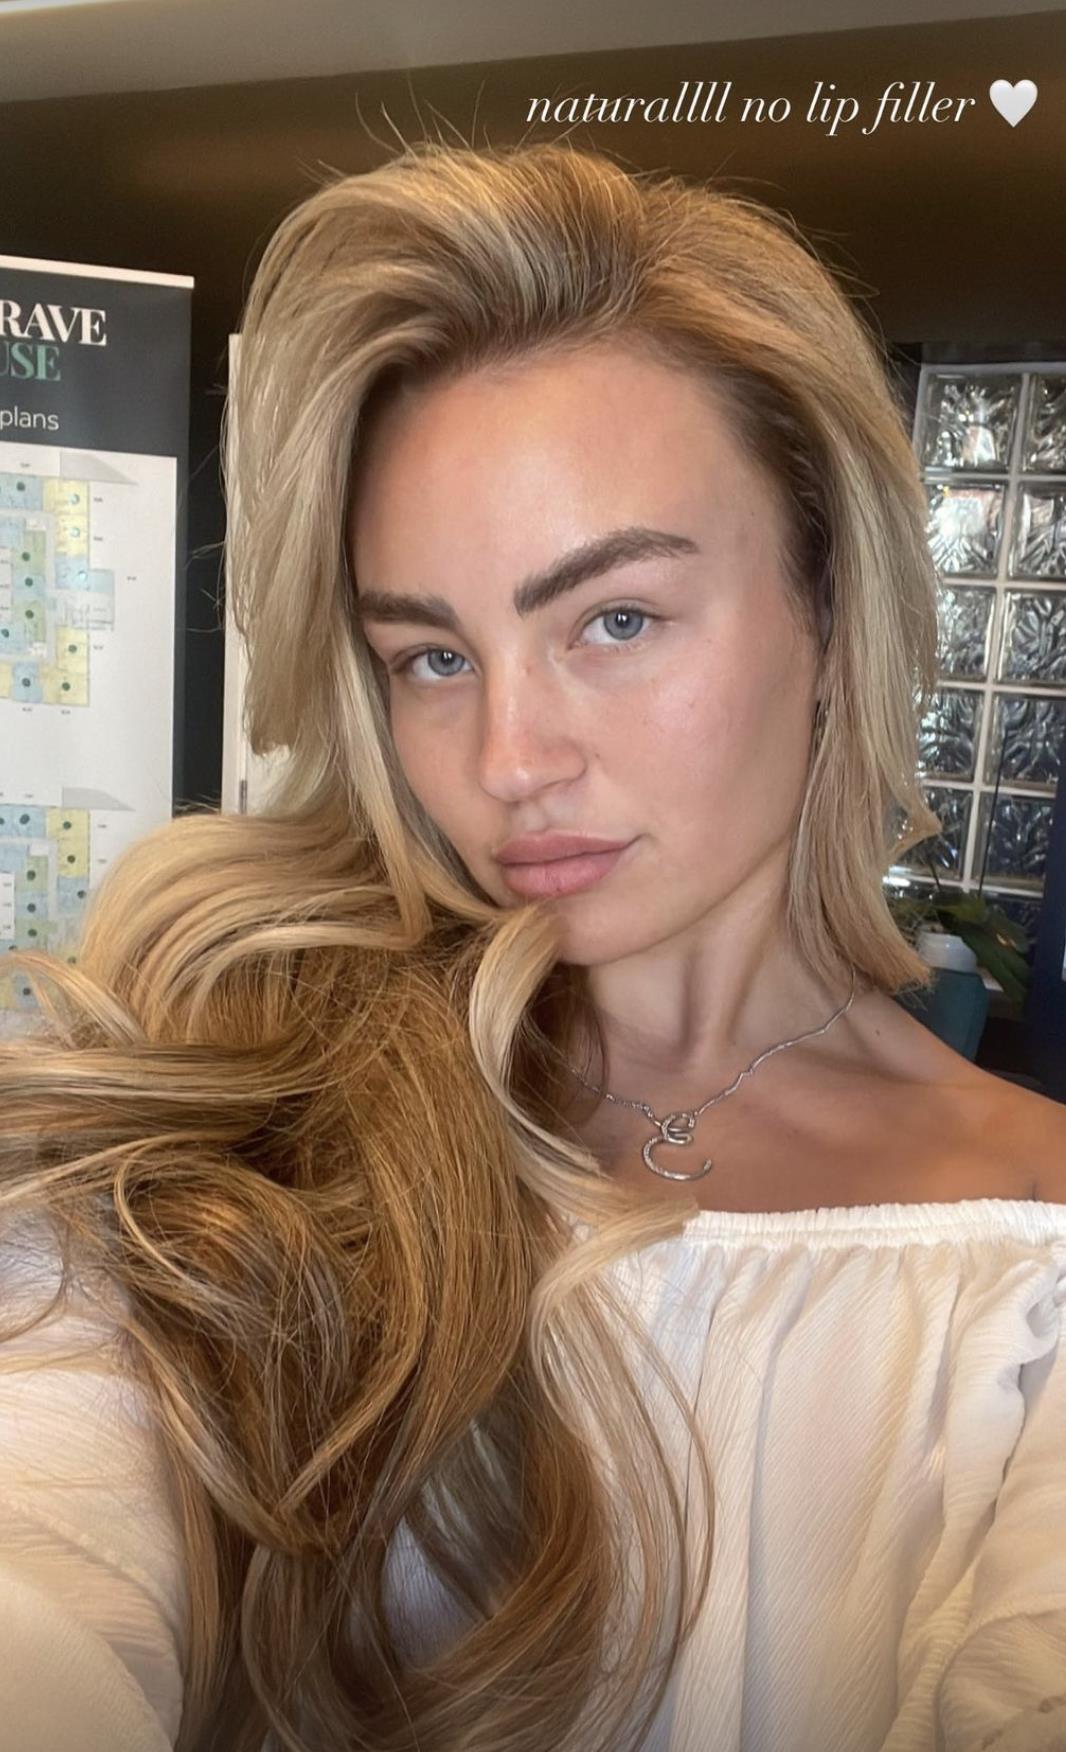 Towie star looks very different in rare make-up free snap after ditching lip fillers